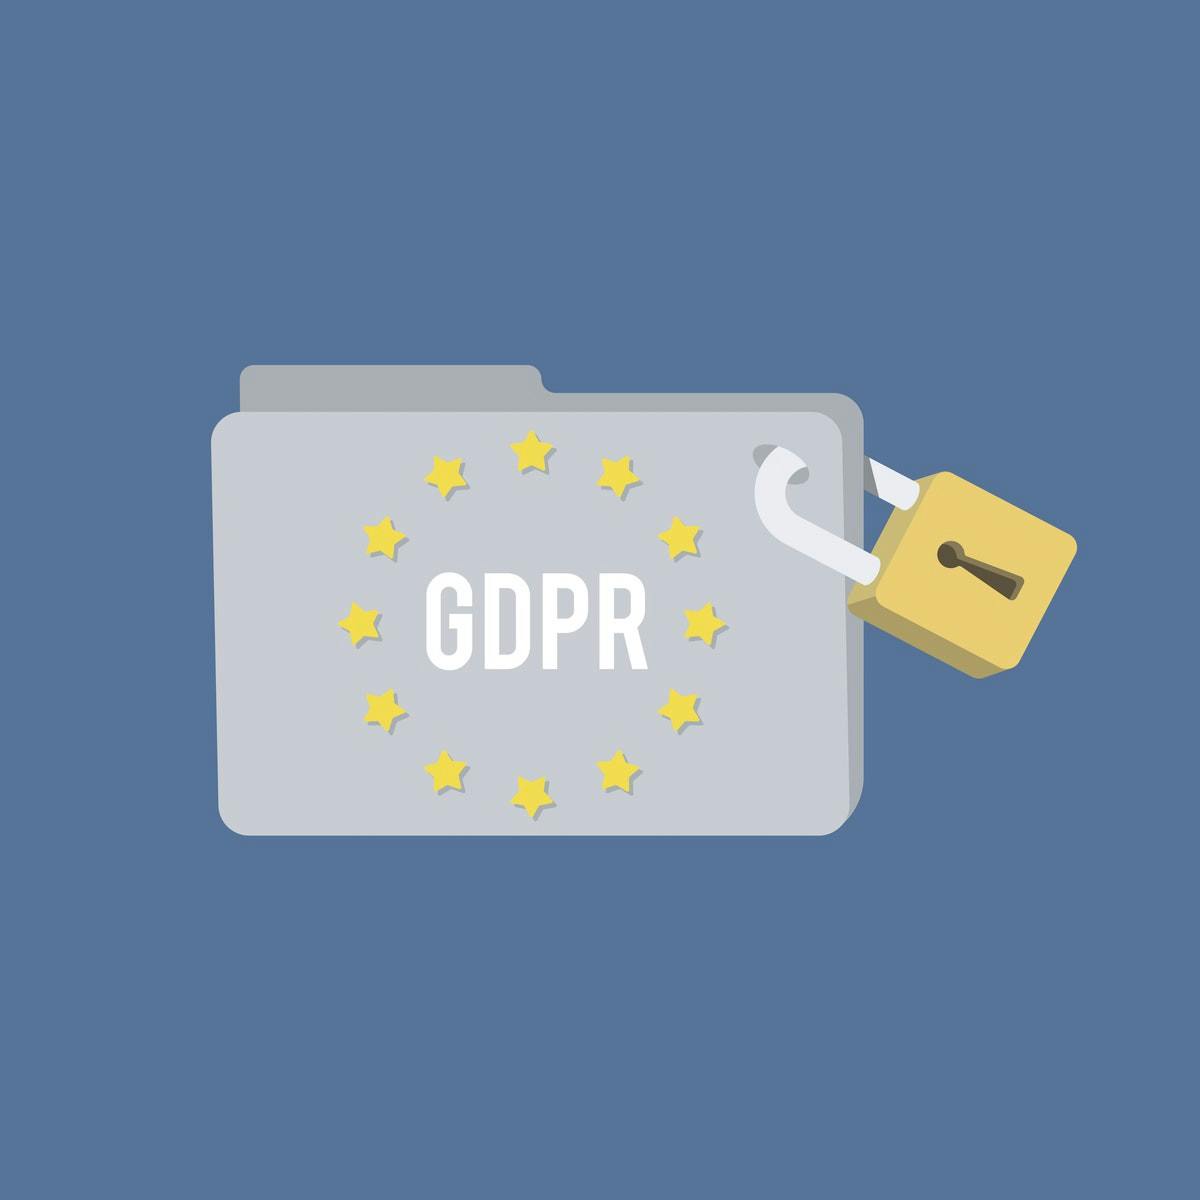 /next-steps-in-gdpr-whats-to-come-in-2019-2137999a4607 feature image